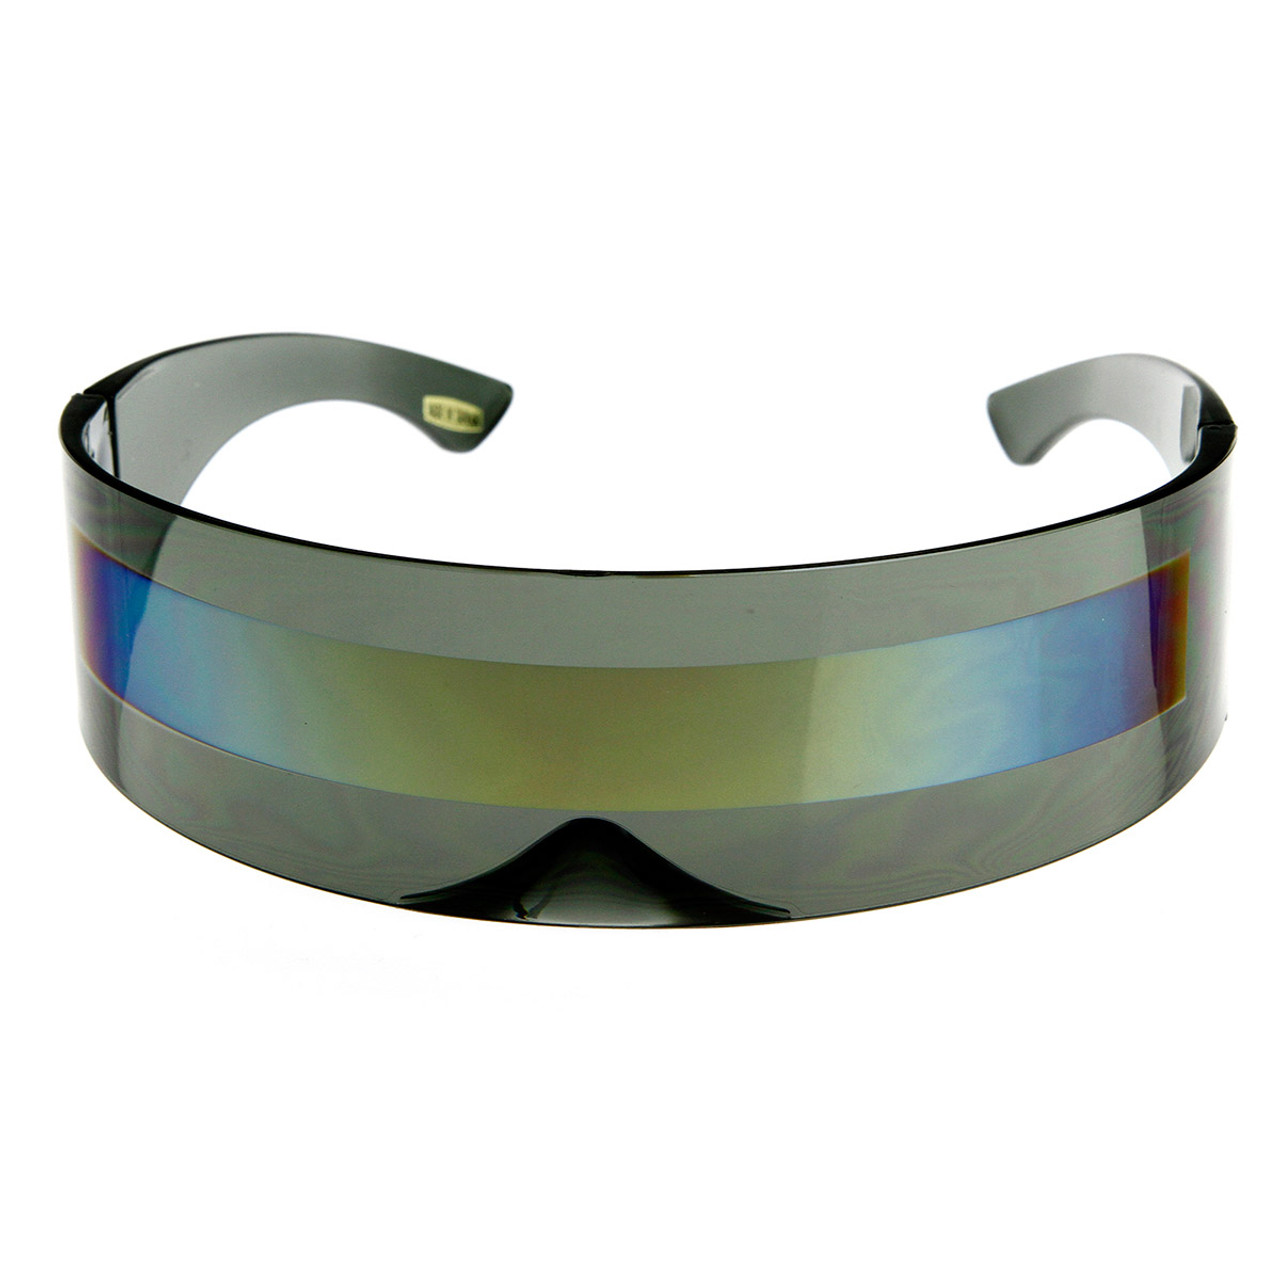 Are sci-fi inspired cyclops sunglasses the next big trend?